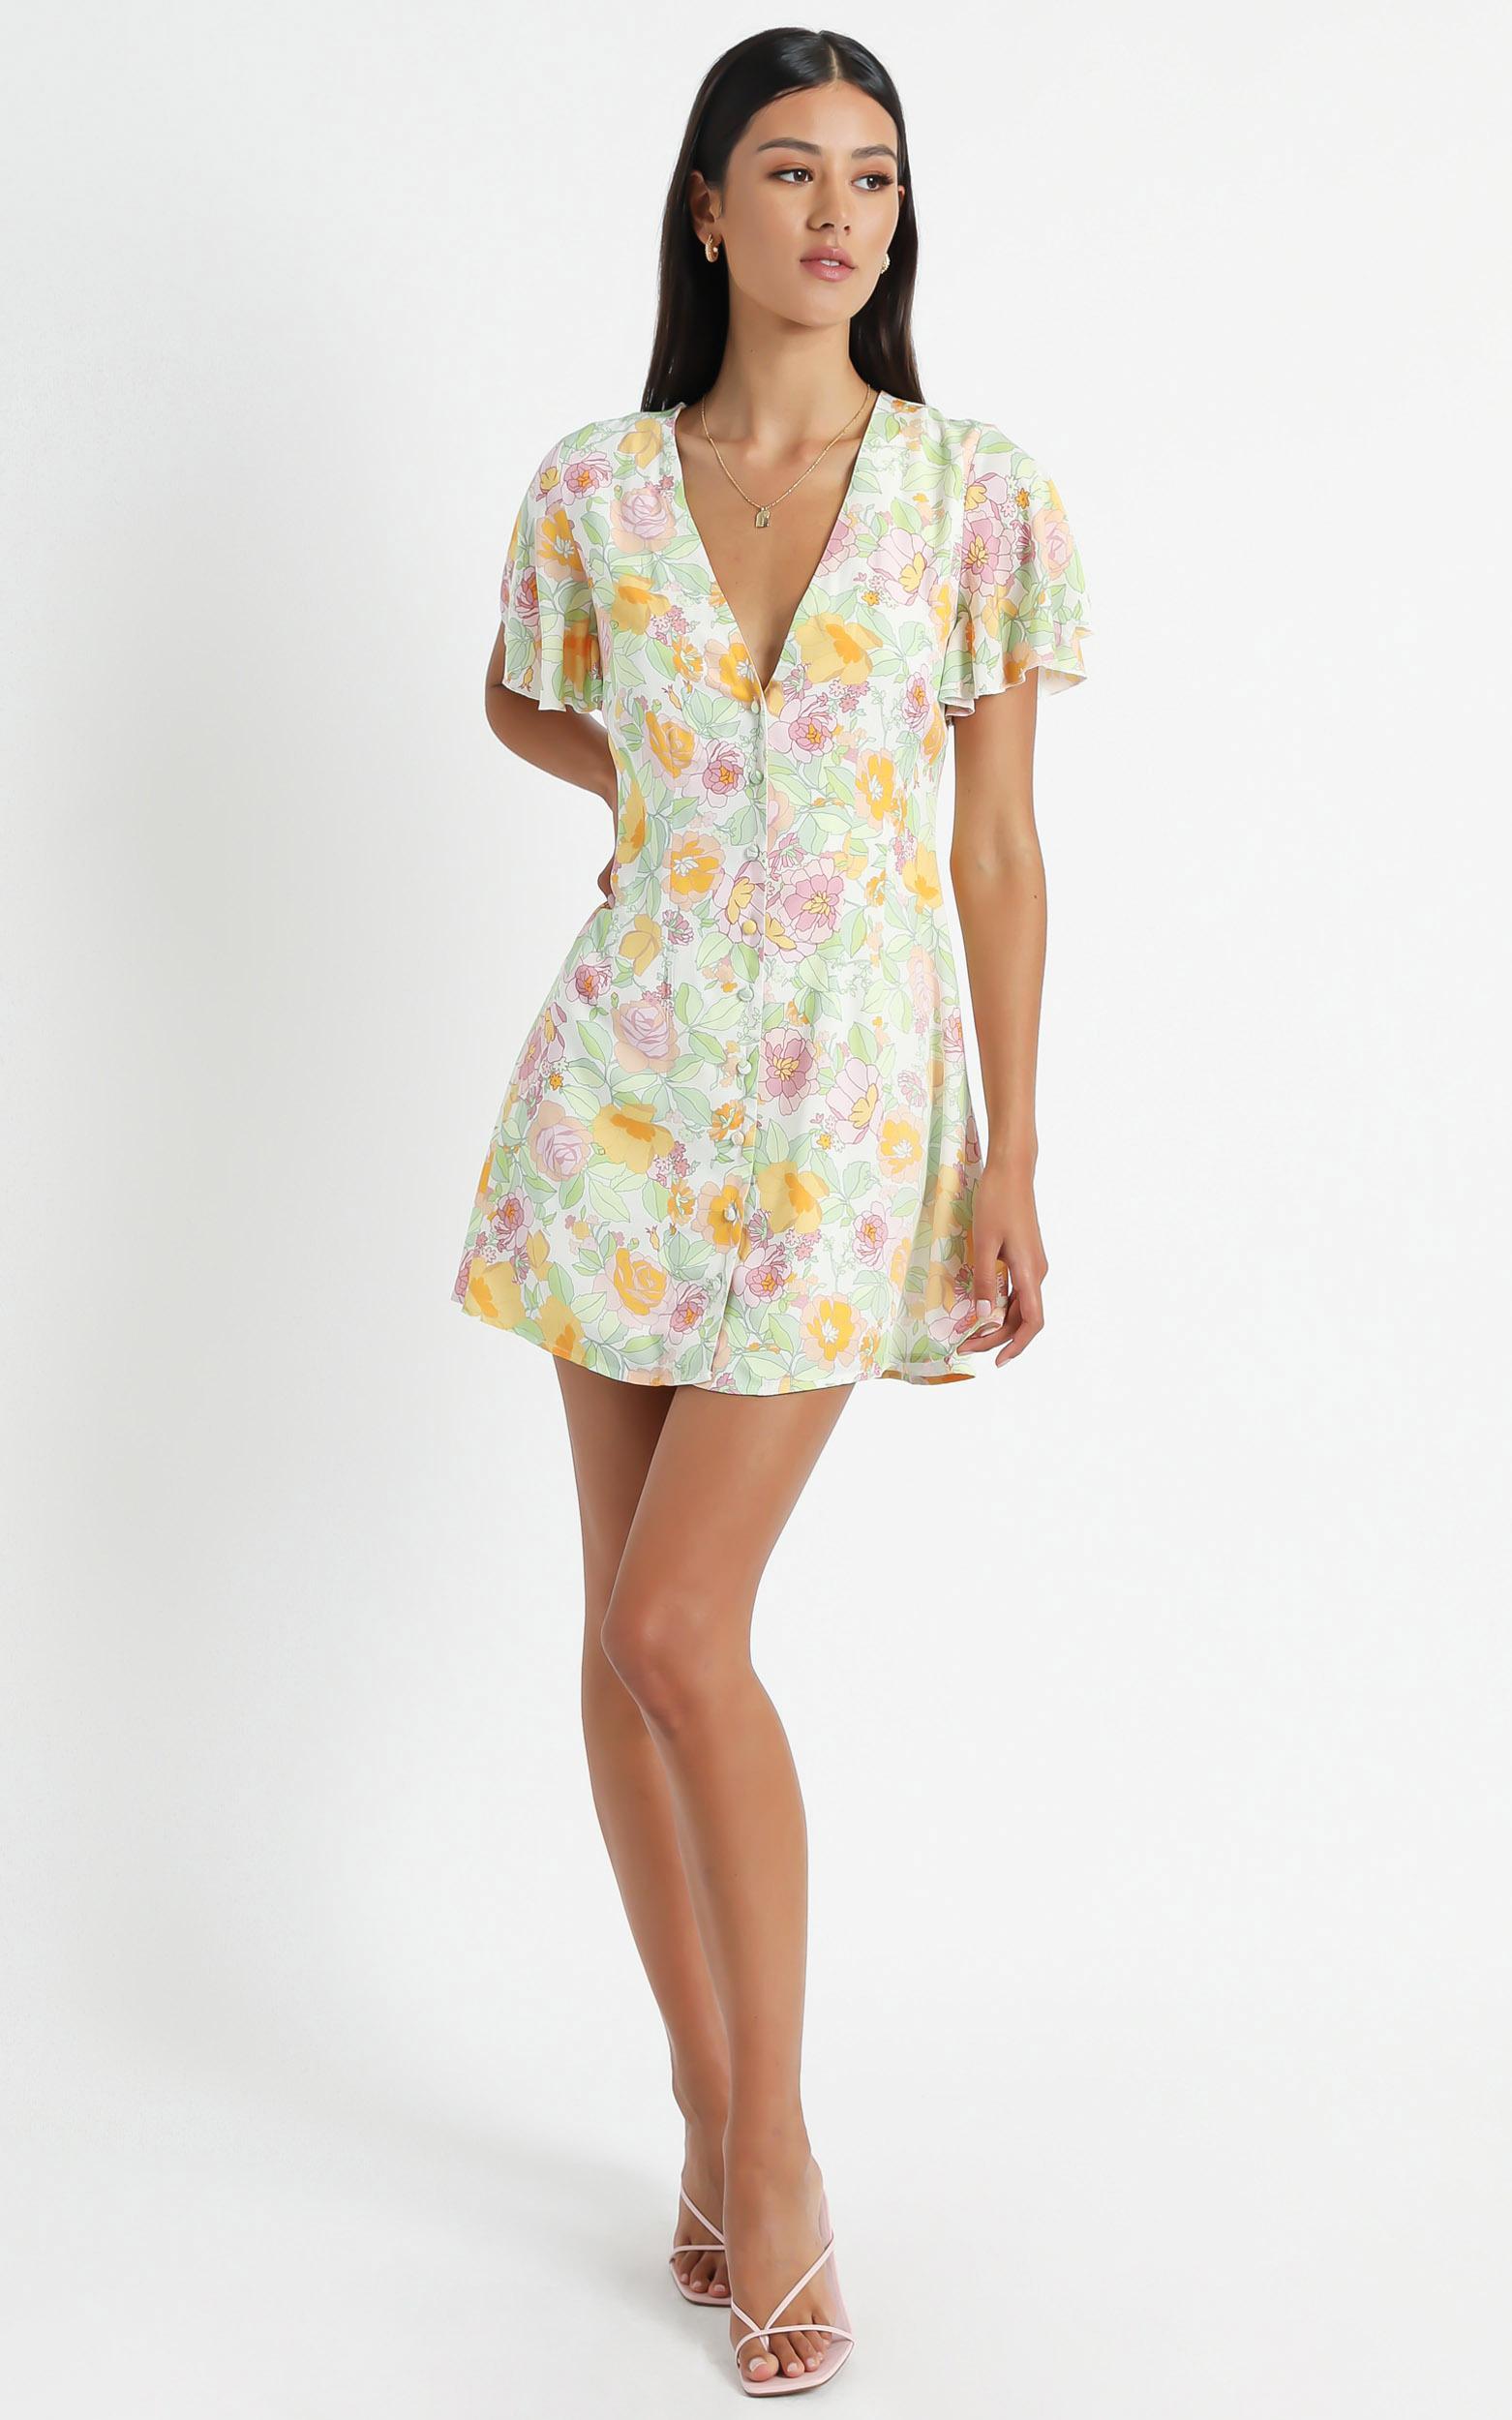 Daiquiri Dress in Linear Floral  - 6 (XS), WHT4, hi-res image number null